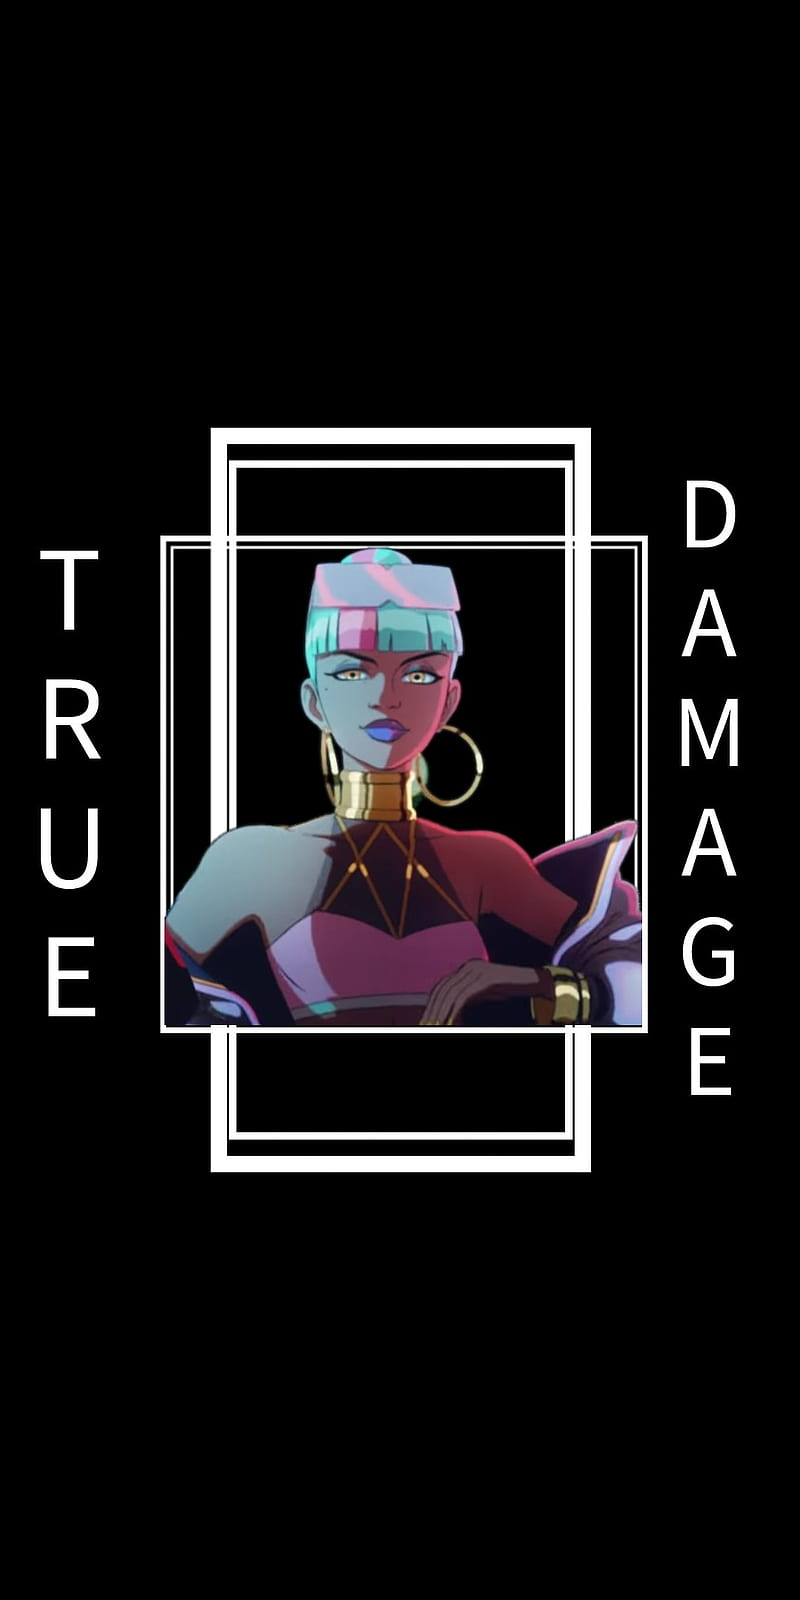 I made some True Damage Qiyana wallpapers (Sorry for the low